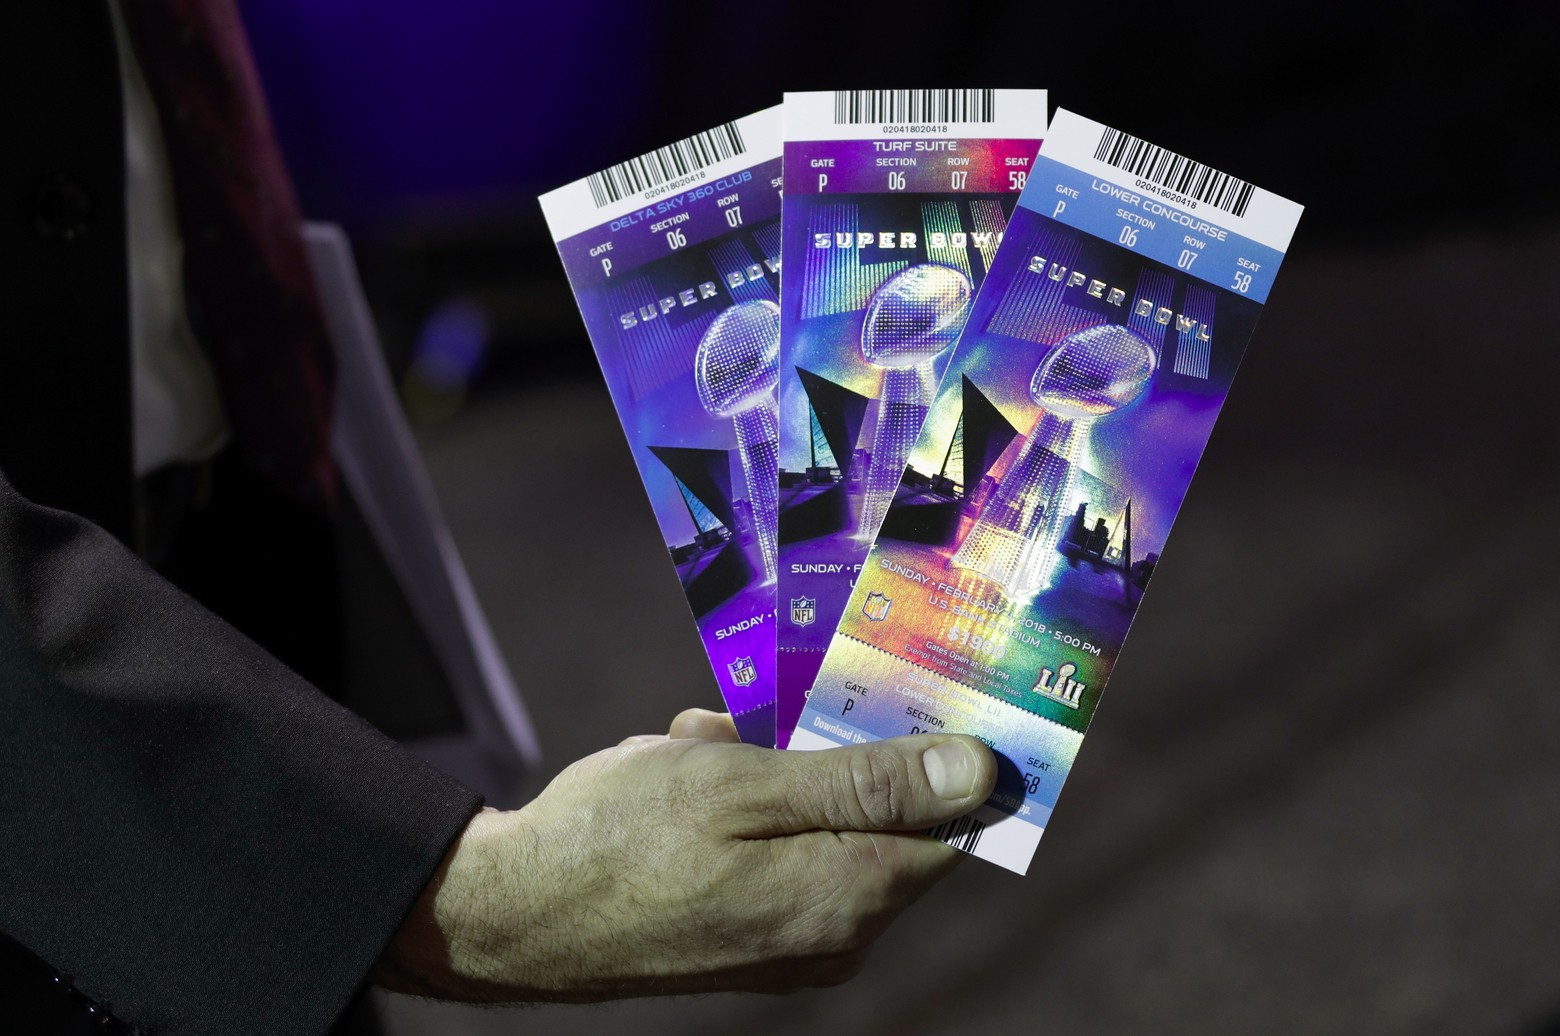 Super Bowl ticket prices still affected by shortage in 2015